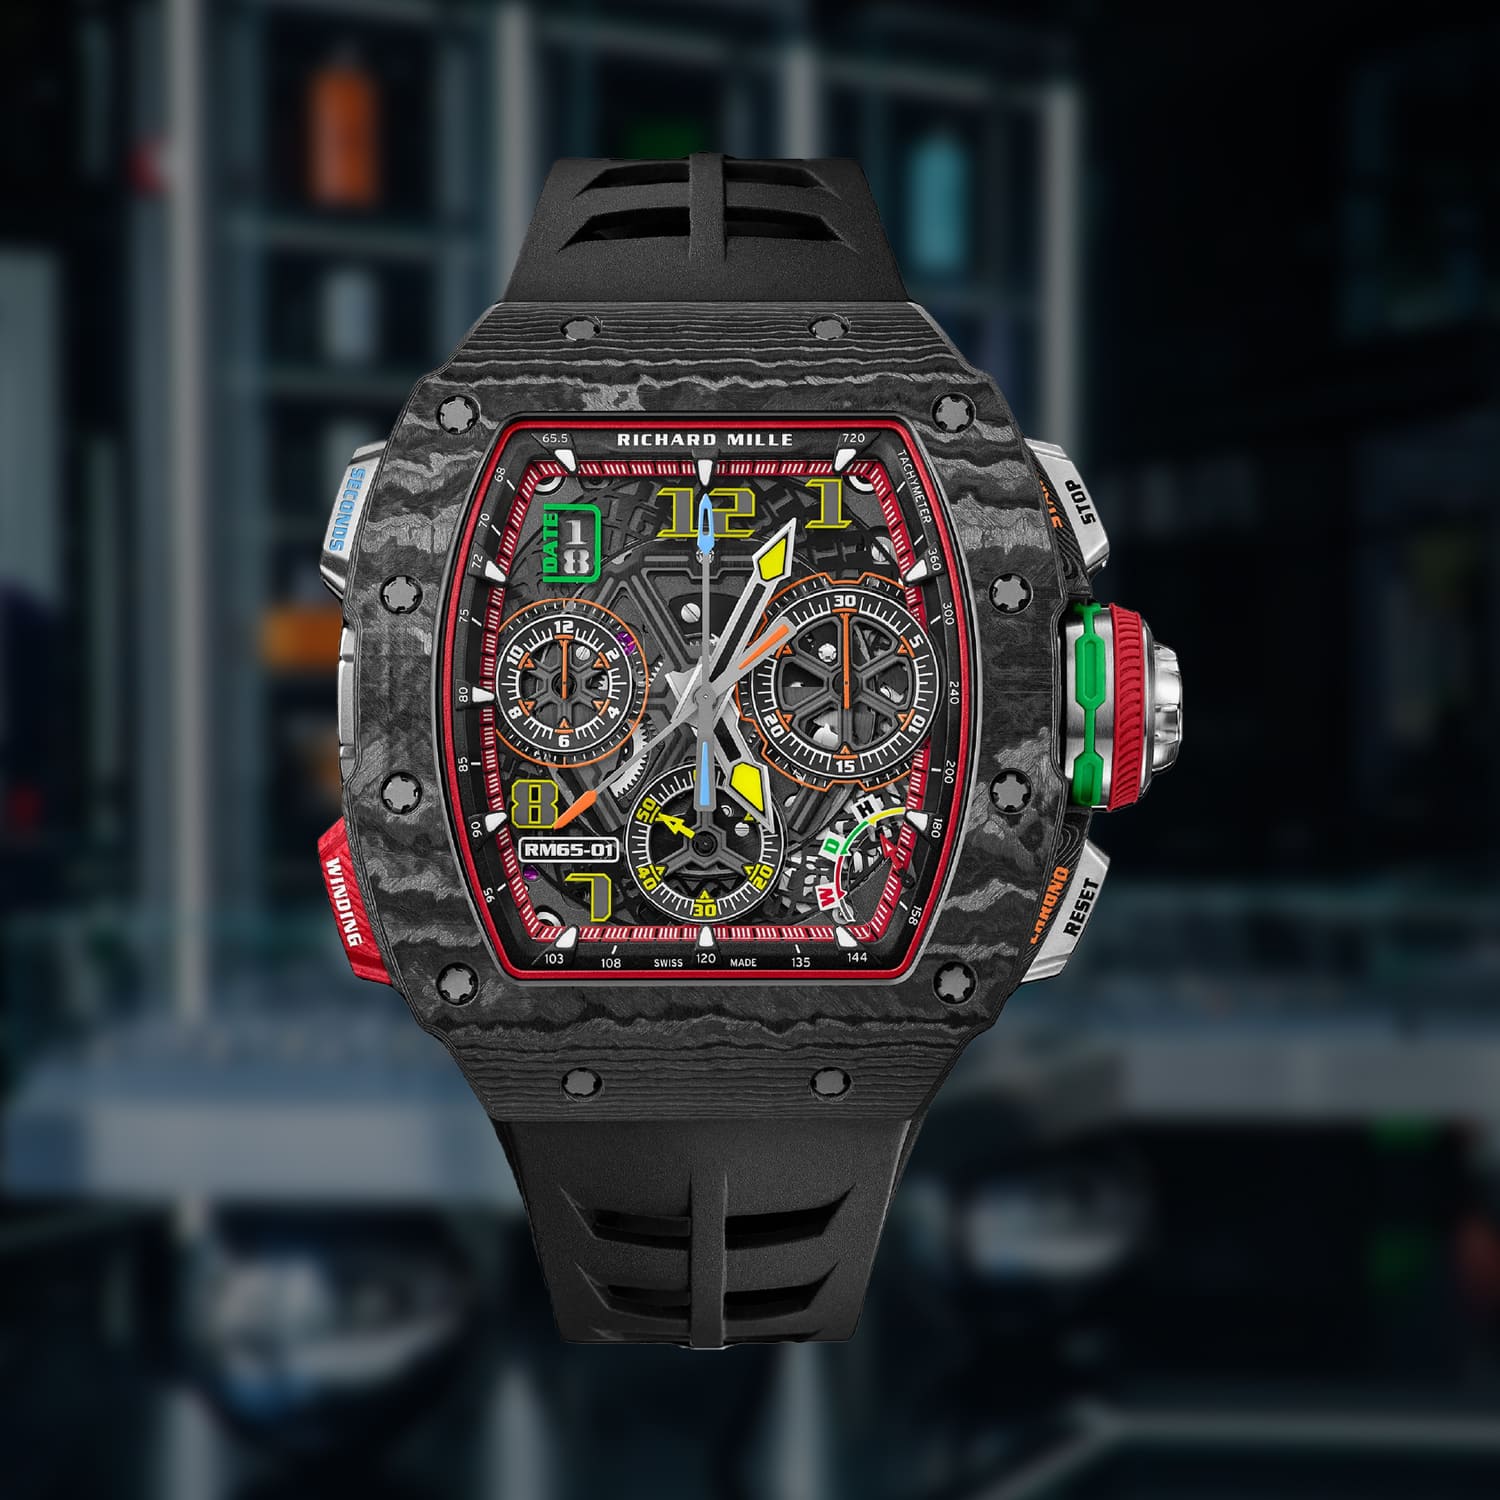 Richard Mille RM65-01, Carbon Case | The Watch Meister